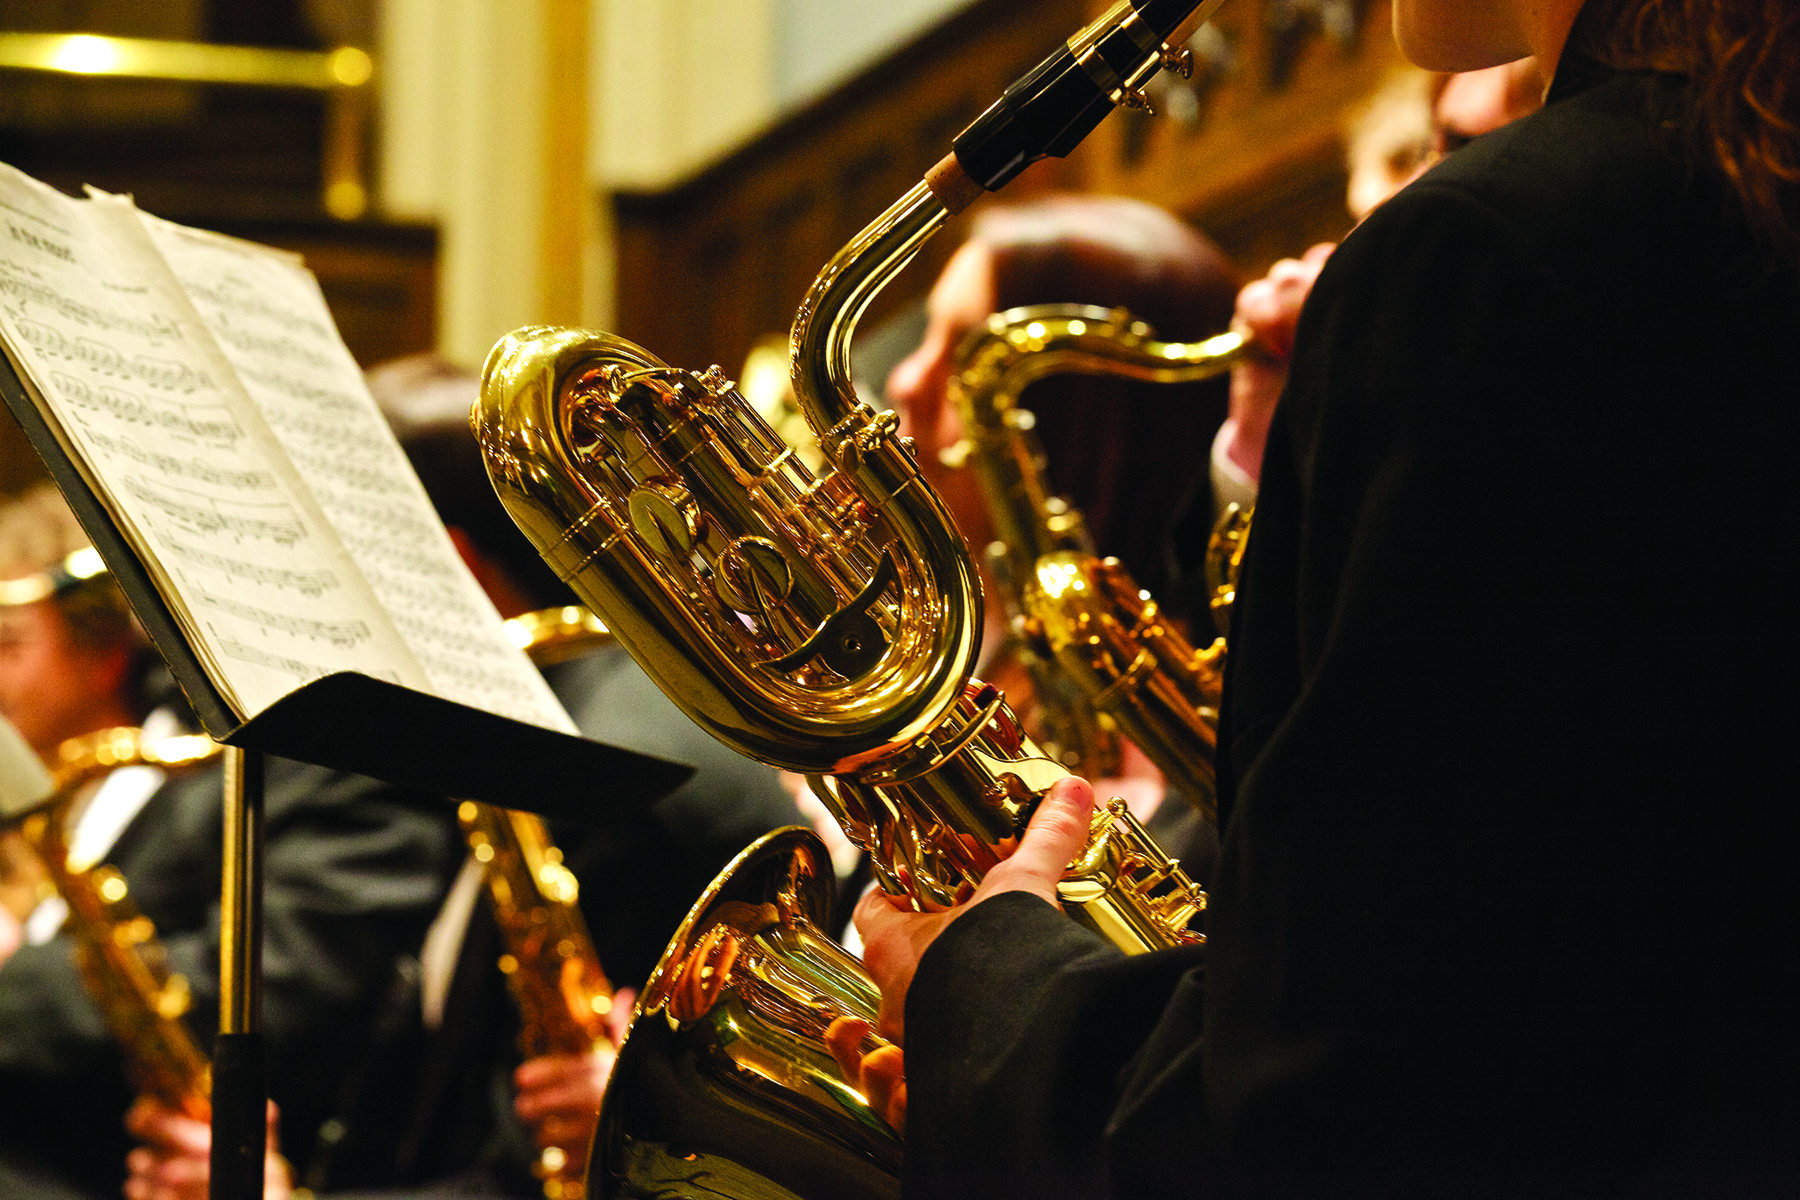 Photo caption: The Scranton Brass Orchestra will perform on Sunday, June 19, at 7:30 p.m. in the Houlihan-McLean Center at The University of Scranton.